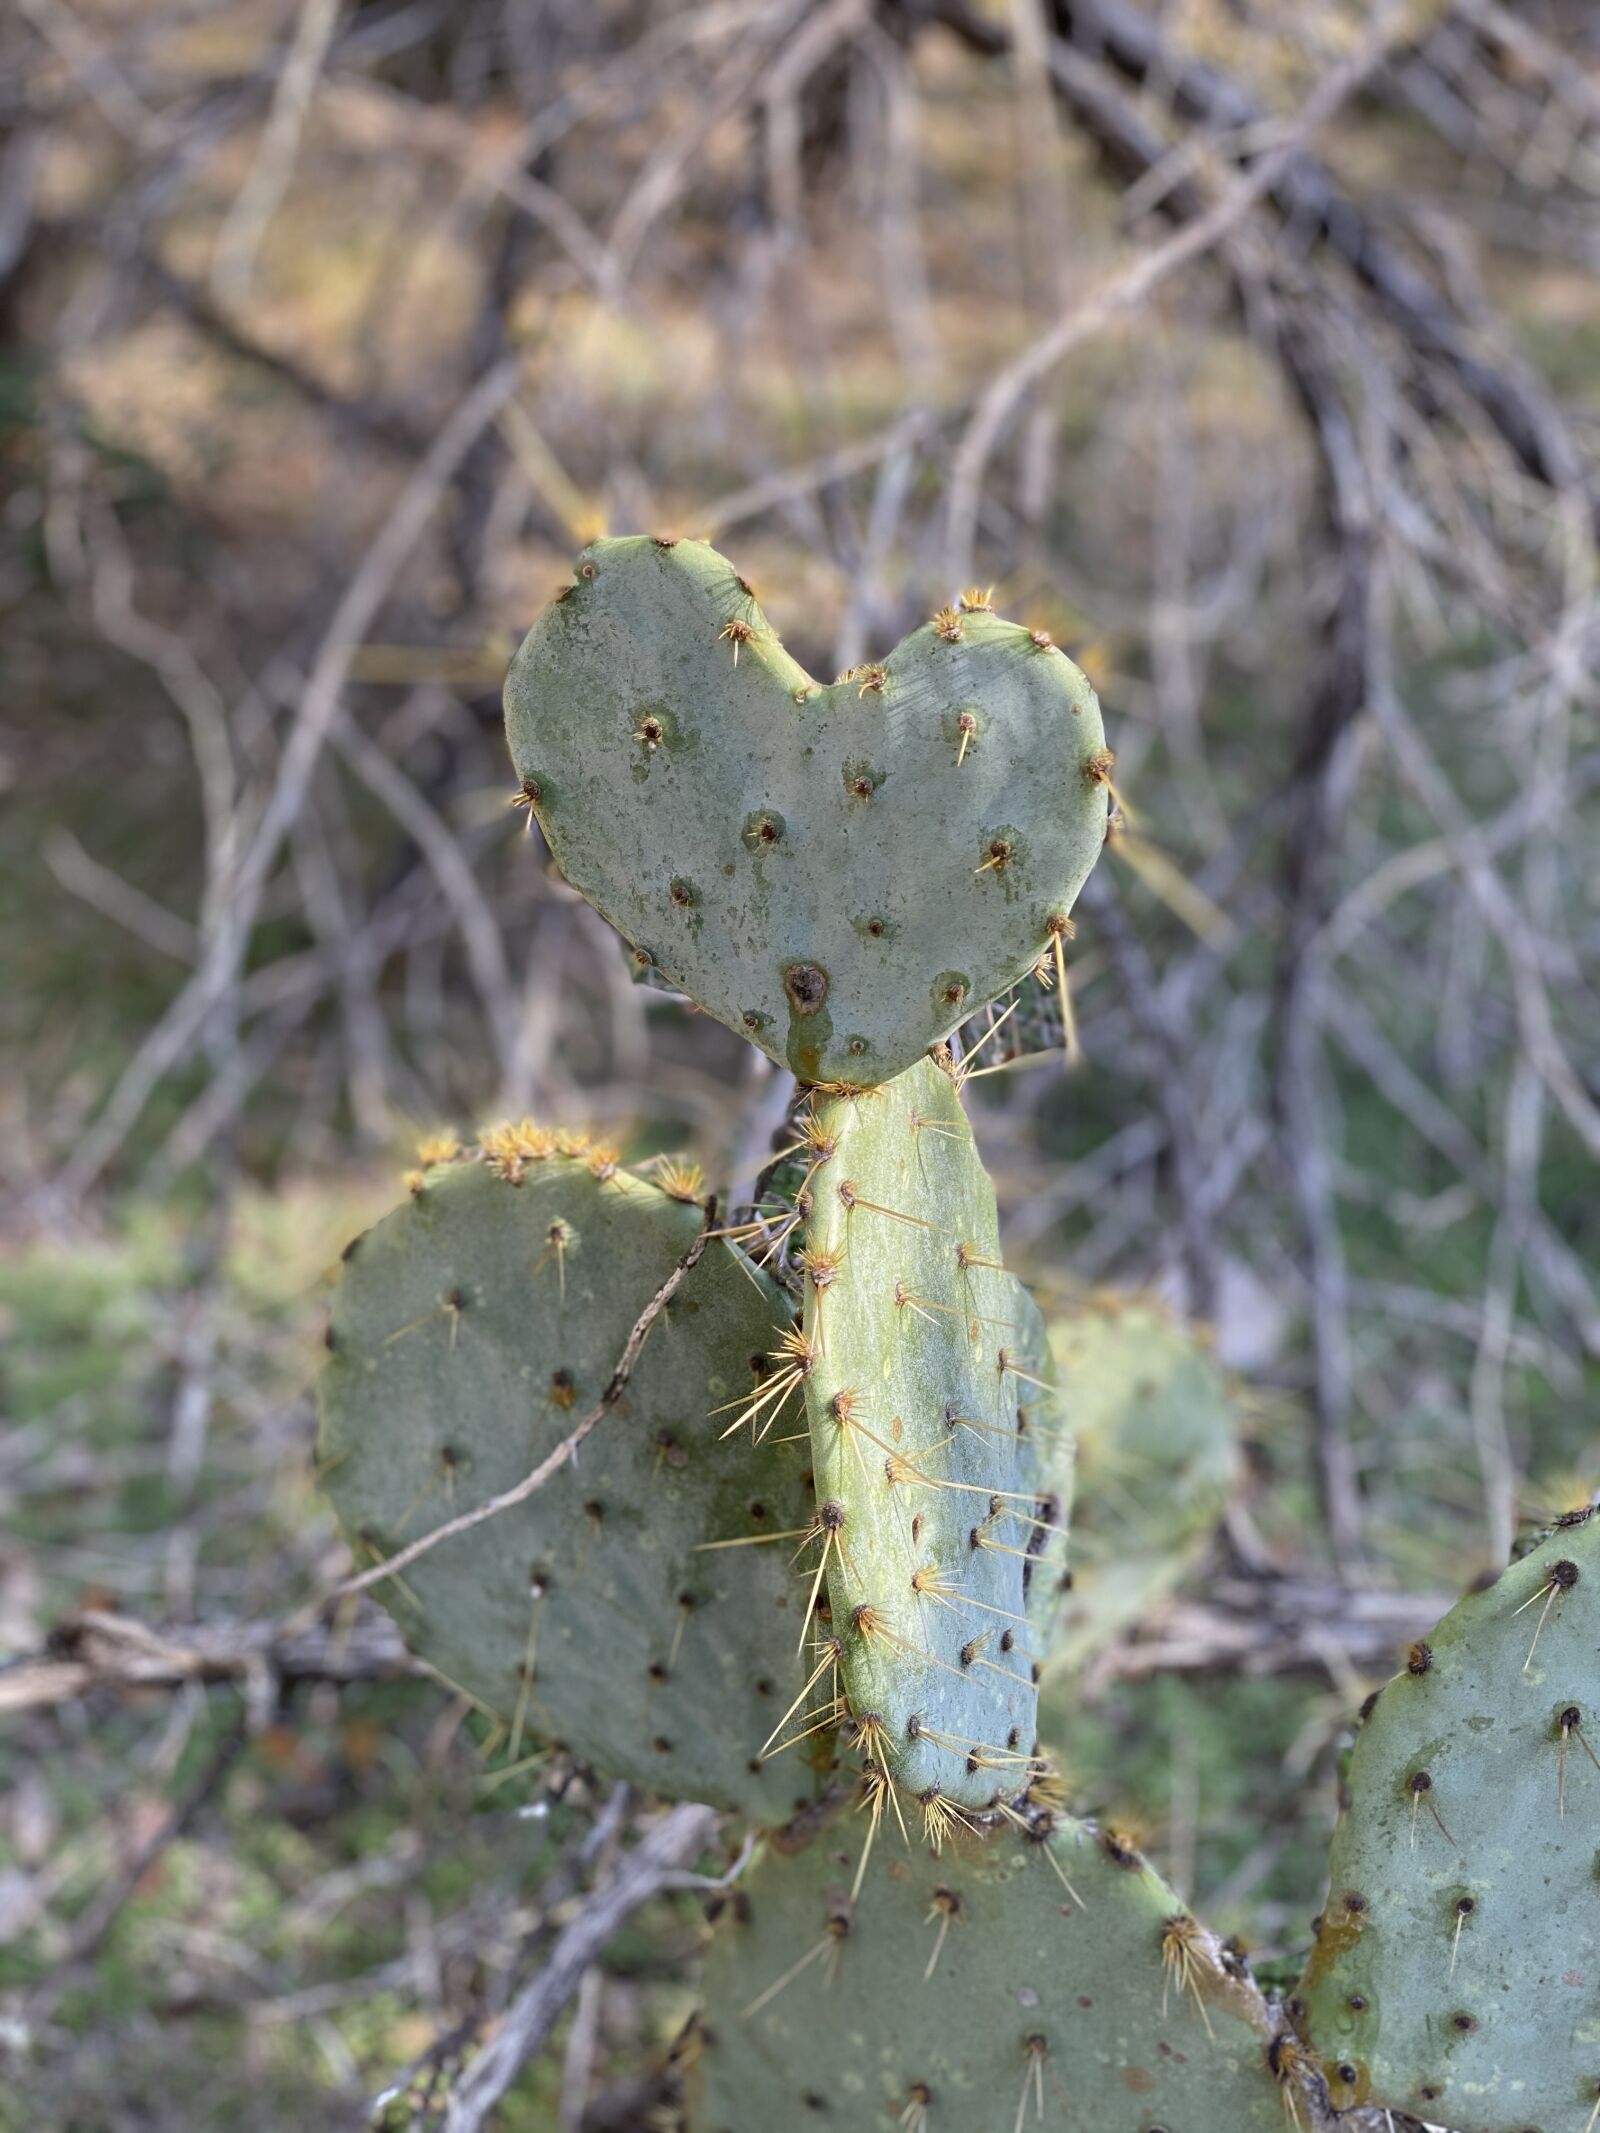 Apple iPhone 11 Pro Max + iPhone 11 Pro Max back dual camera 6mm f/2 sample photo. Heart shaped cactus, texas photography